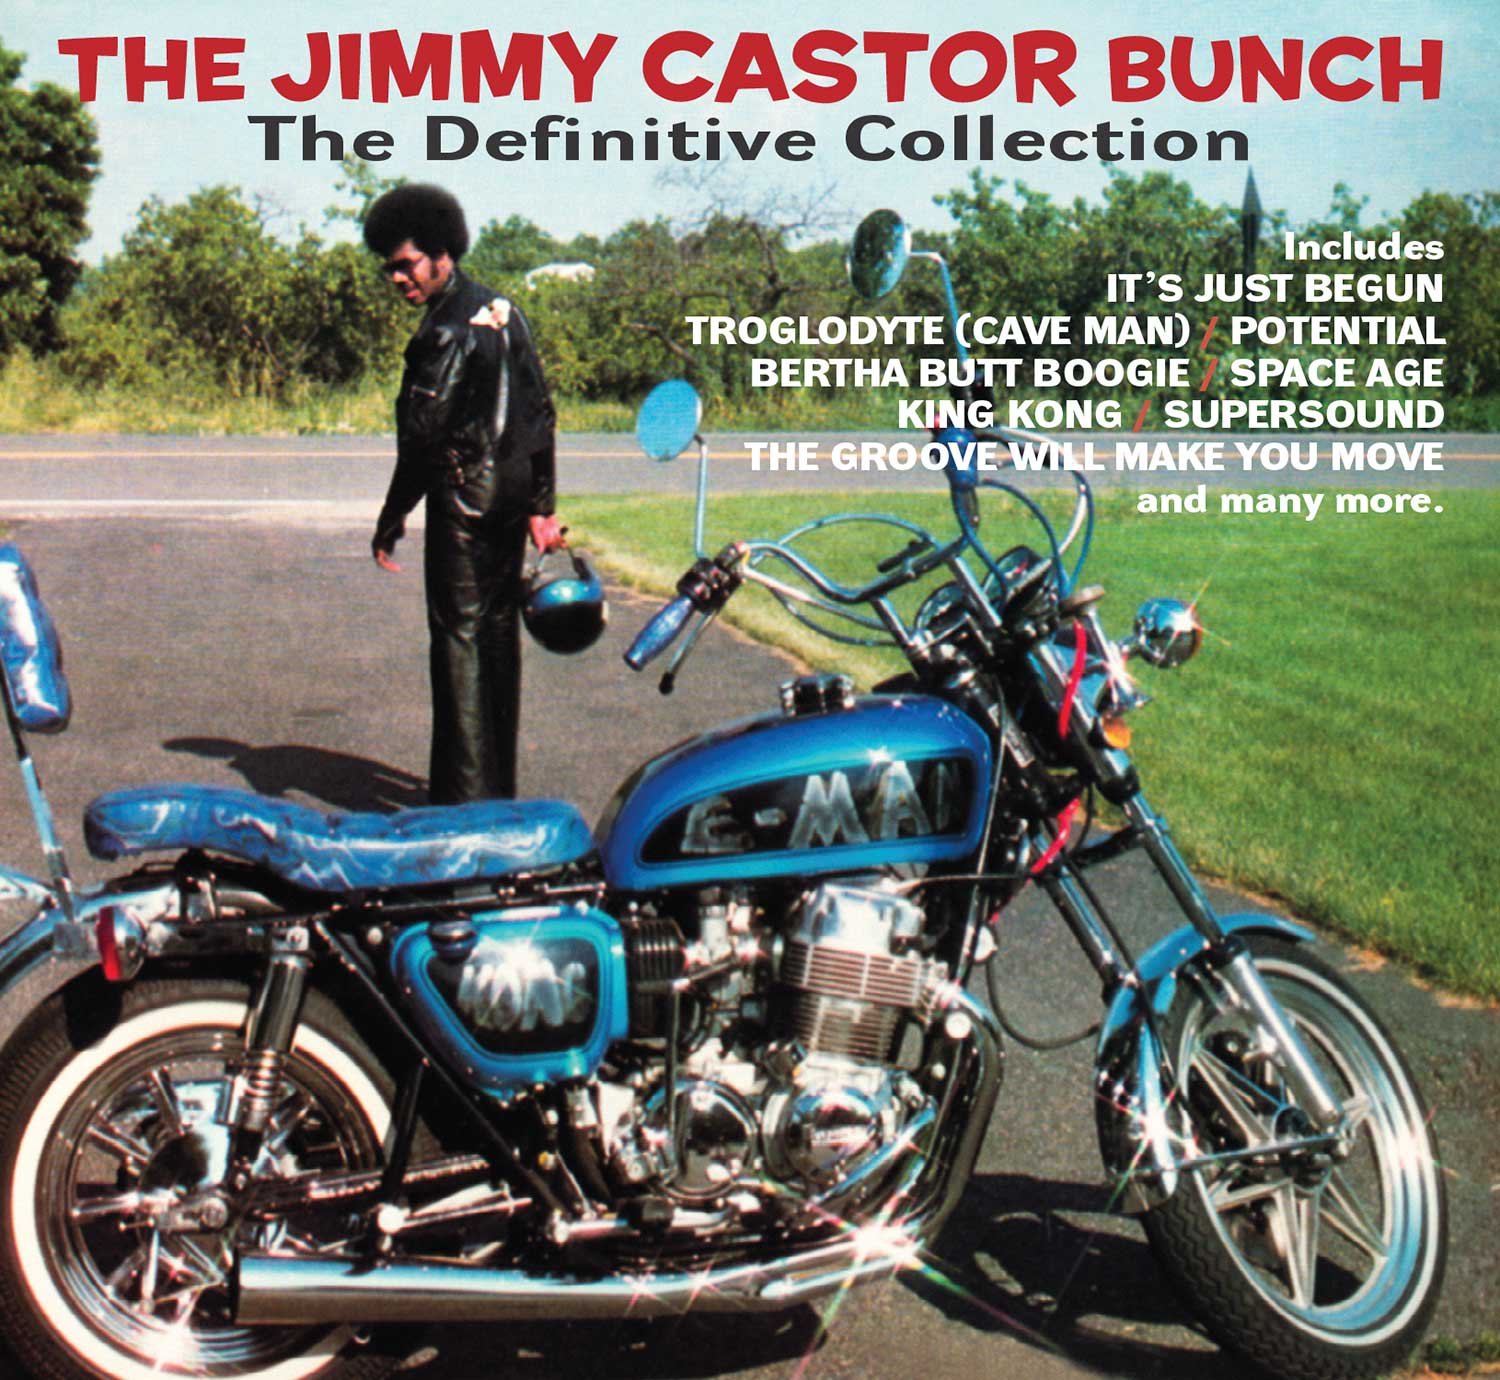 Jimmy Castor Bunch -Definitive Collection